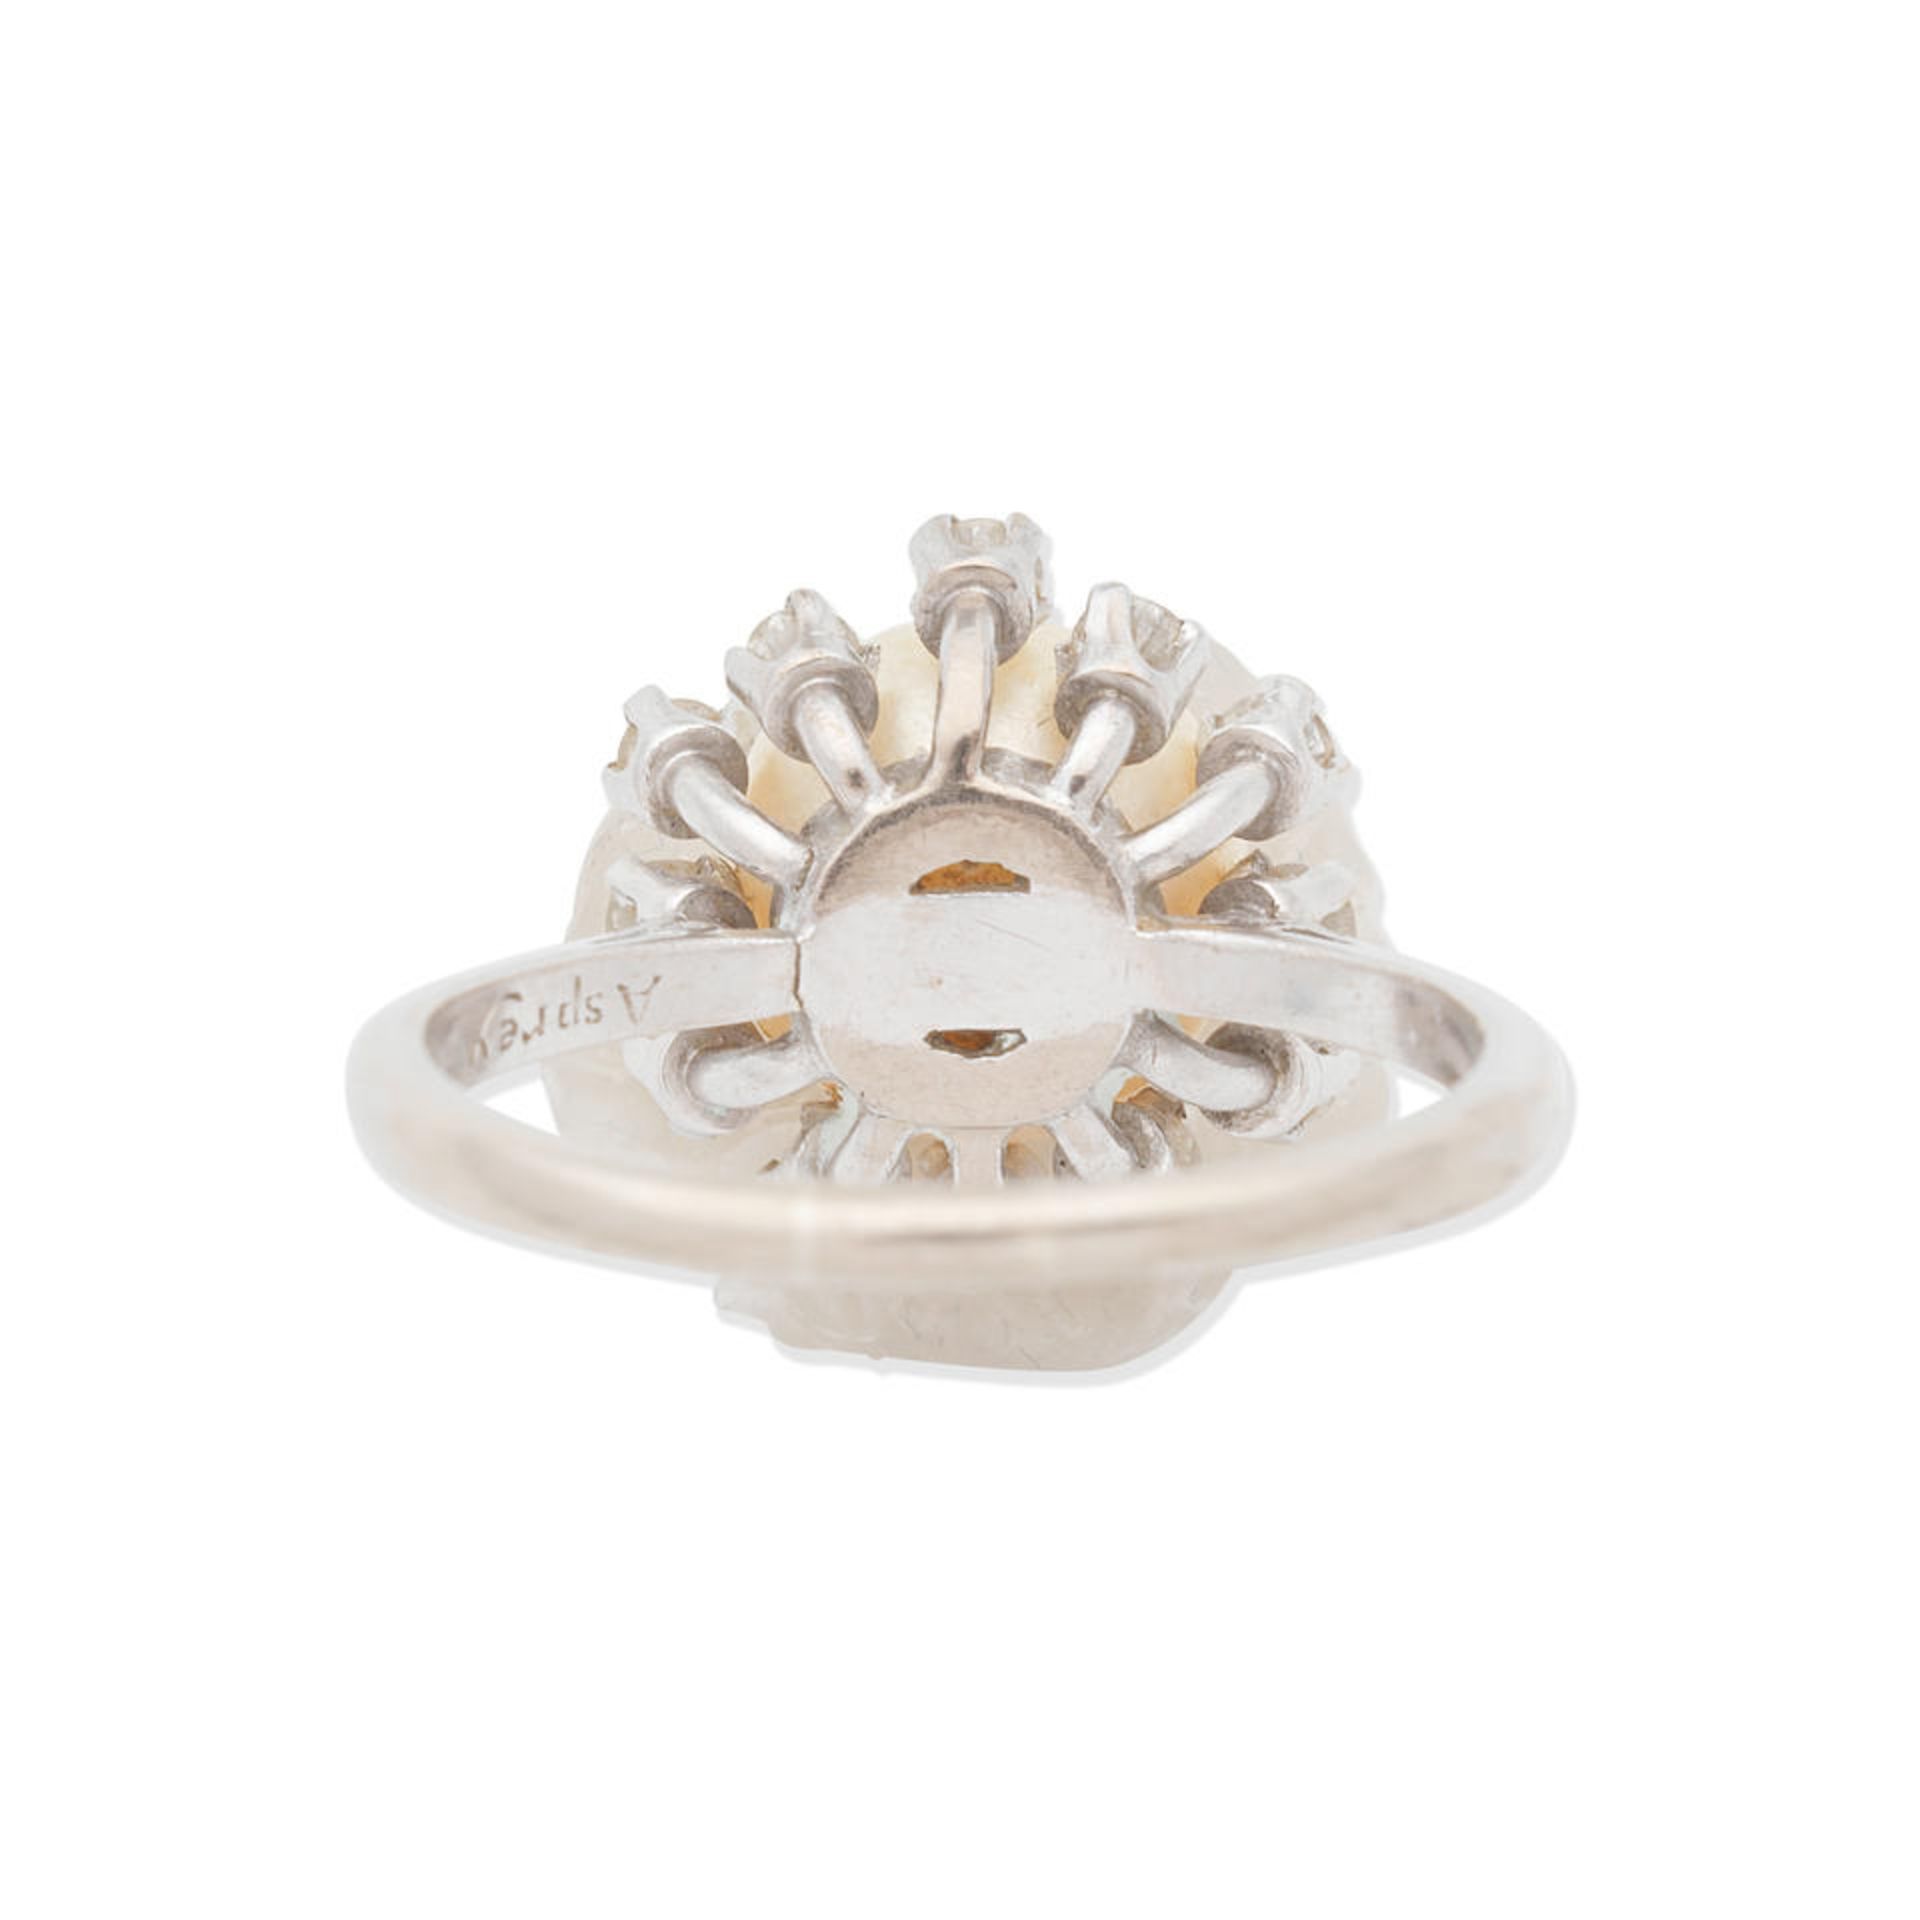 ASPREY: CULTURED PEARL AND DIAMOND RING - Image 2 of 3